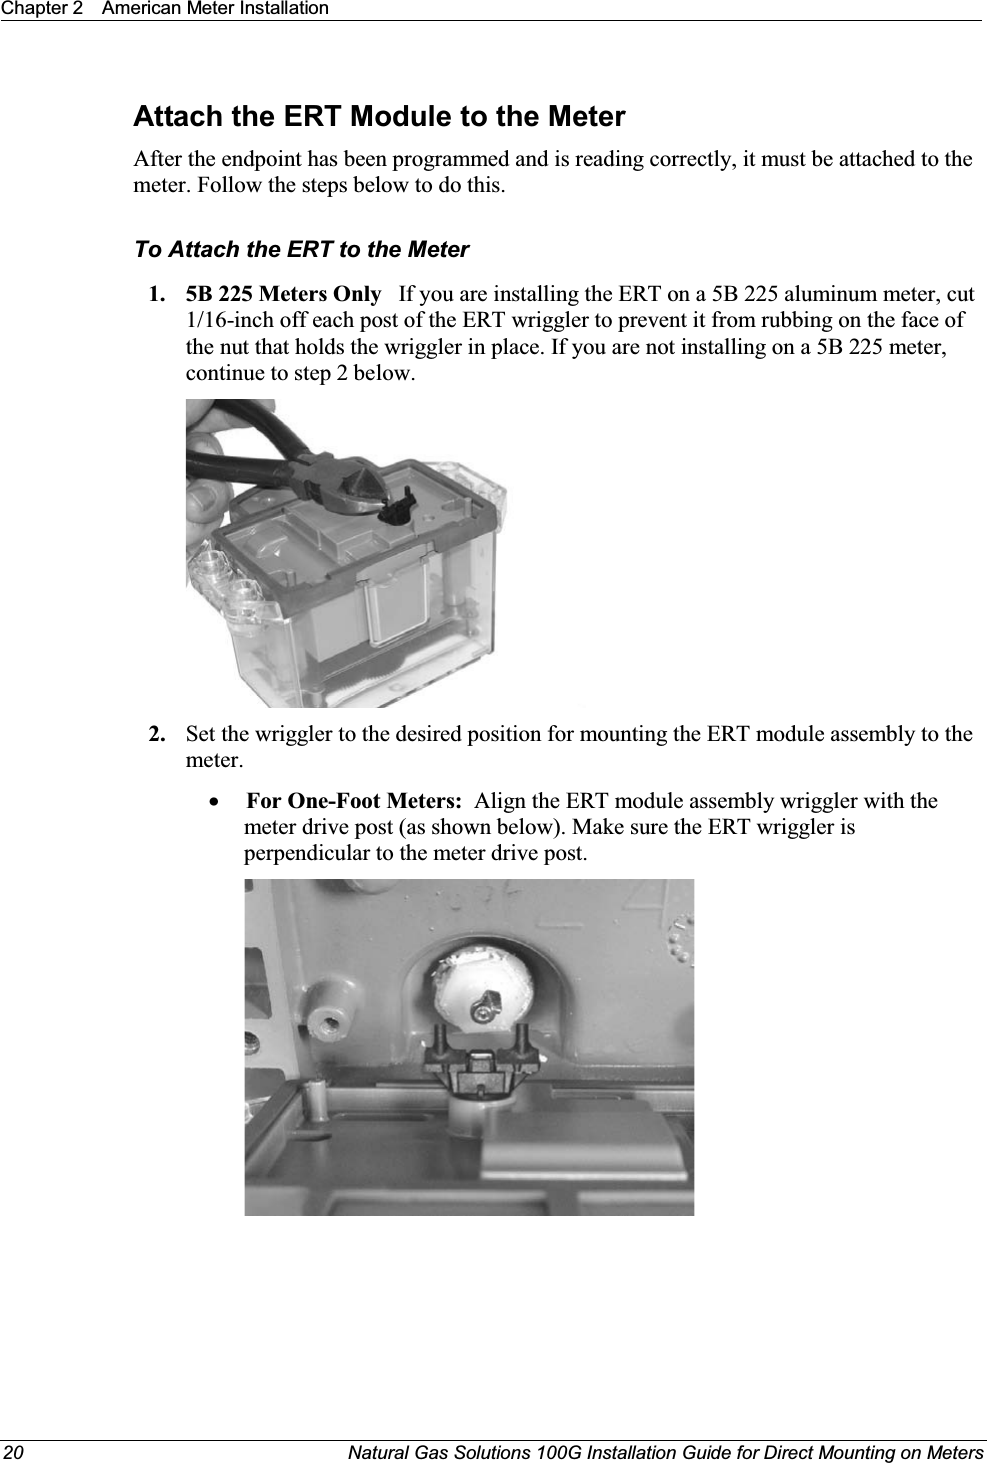 Chapter 2 American Meter Installation20 Natural Gas Solutions 100G Installation Guide for Direct Mounting on MetersAttach the ERT Module to the MeterAfter the endpoint has been programmed and is reading correctly, it must be attached to the meter. Follow the steps below to do this. To Attach the ERT to the Meter1. 5B 225 Meters Only   If you are installing the ERT on a 5B 225 aluminum meter, cut 1/16-inch off each post of the ERT wriggler to prevent it from rubbing on the face of the nut that holds the wriggler in place. If you are not installing on a 5B 225 meter, continue to step 2 below. 2. Set the wriggler to the desired position for mounting the ERT module assembly to the meter. xFor One-Foot Meters: Align the ERT module assembly wriggler with the meter drive post (as shown below). Make sure the ERT wriggler is perpendicular to the meter drive post.  